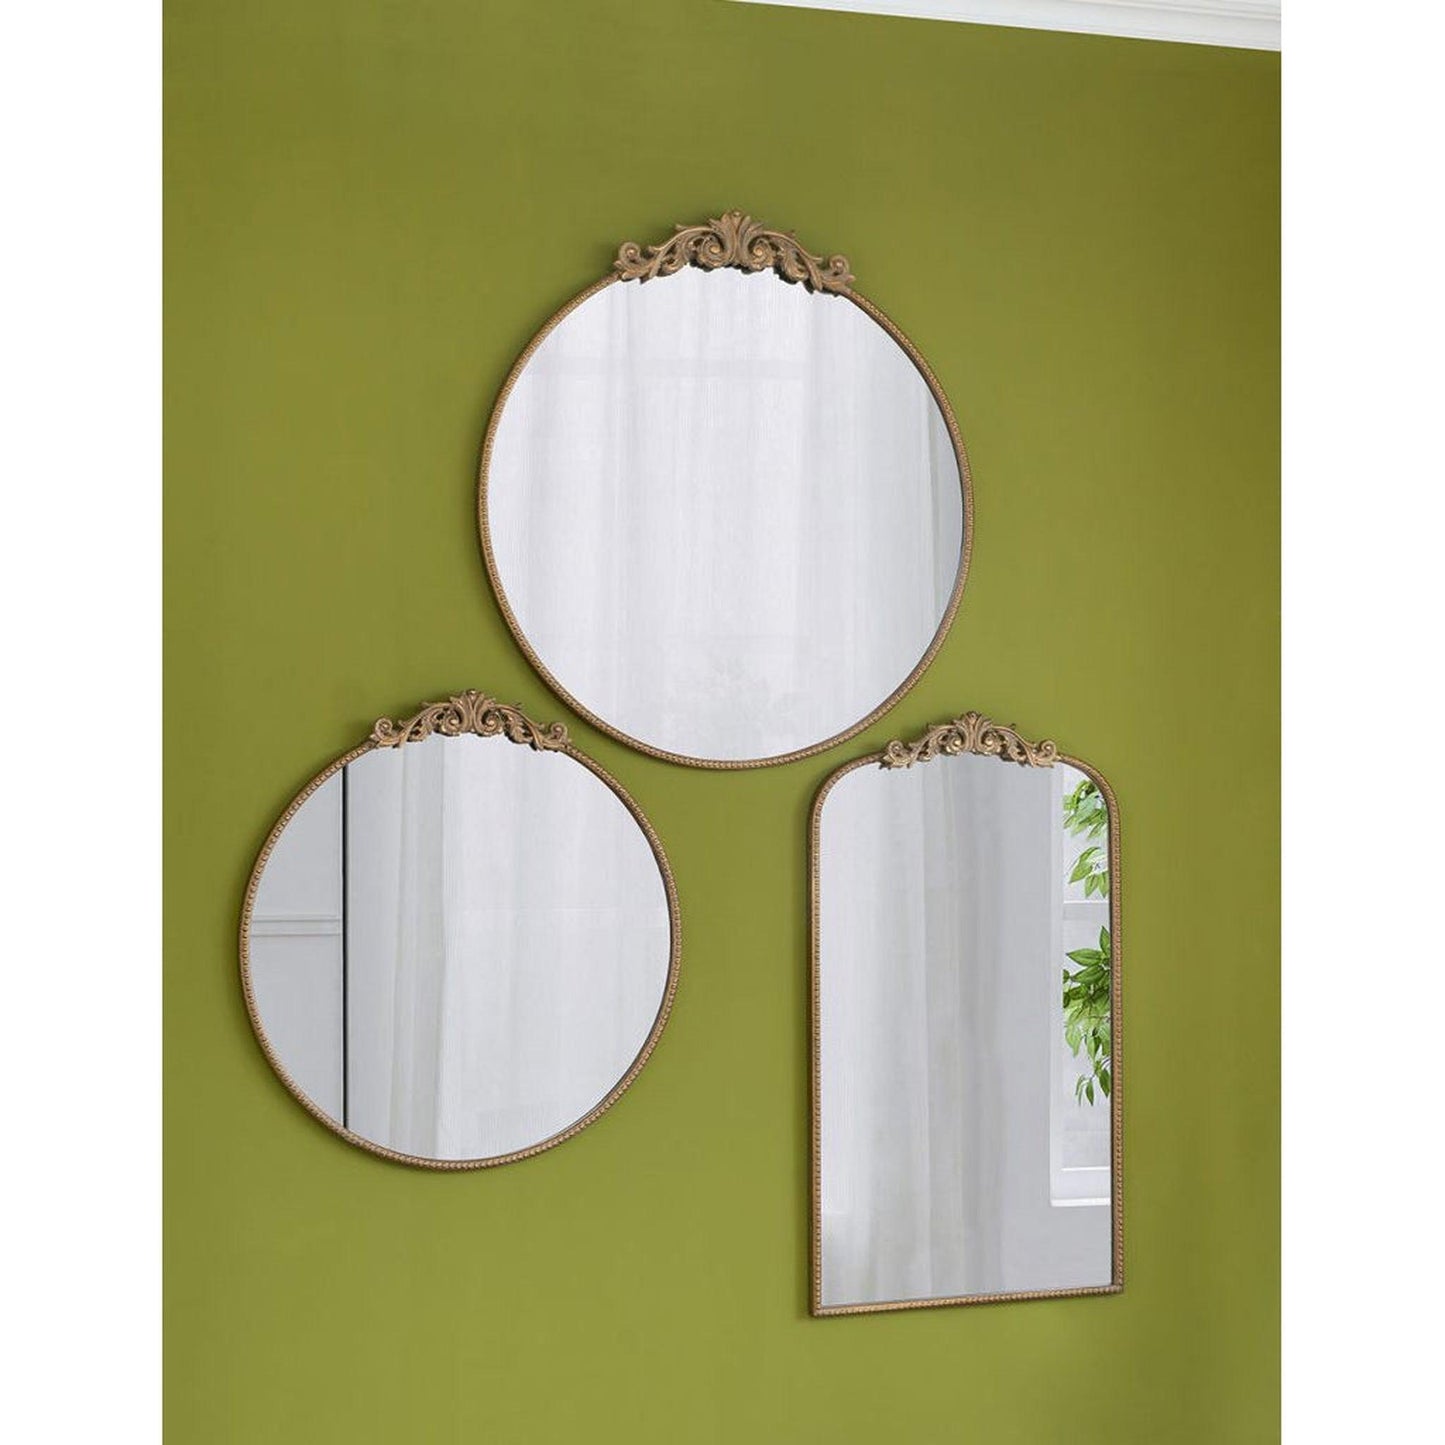 A&B Home Dia 36" x 39" Bundle of 10 Oval Shaped Gold Frame Wall-Mounted Mirror